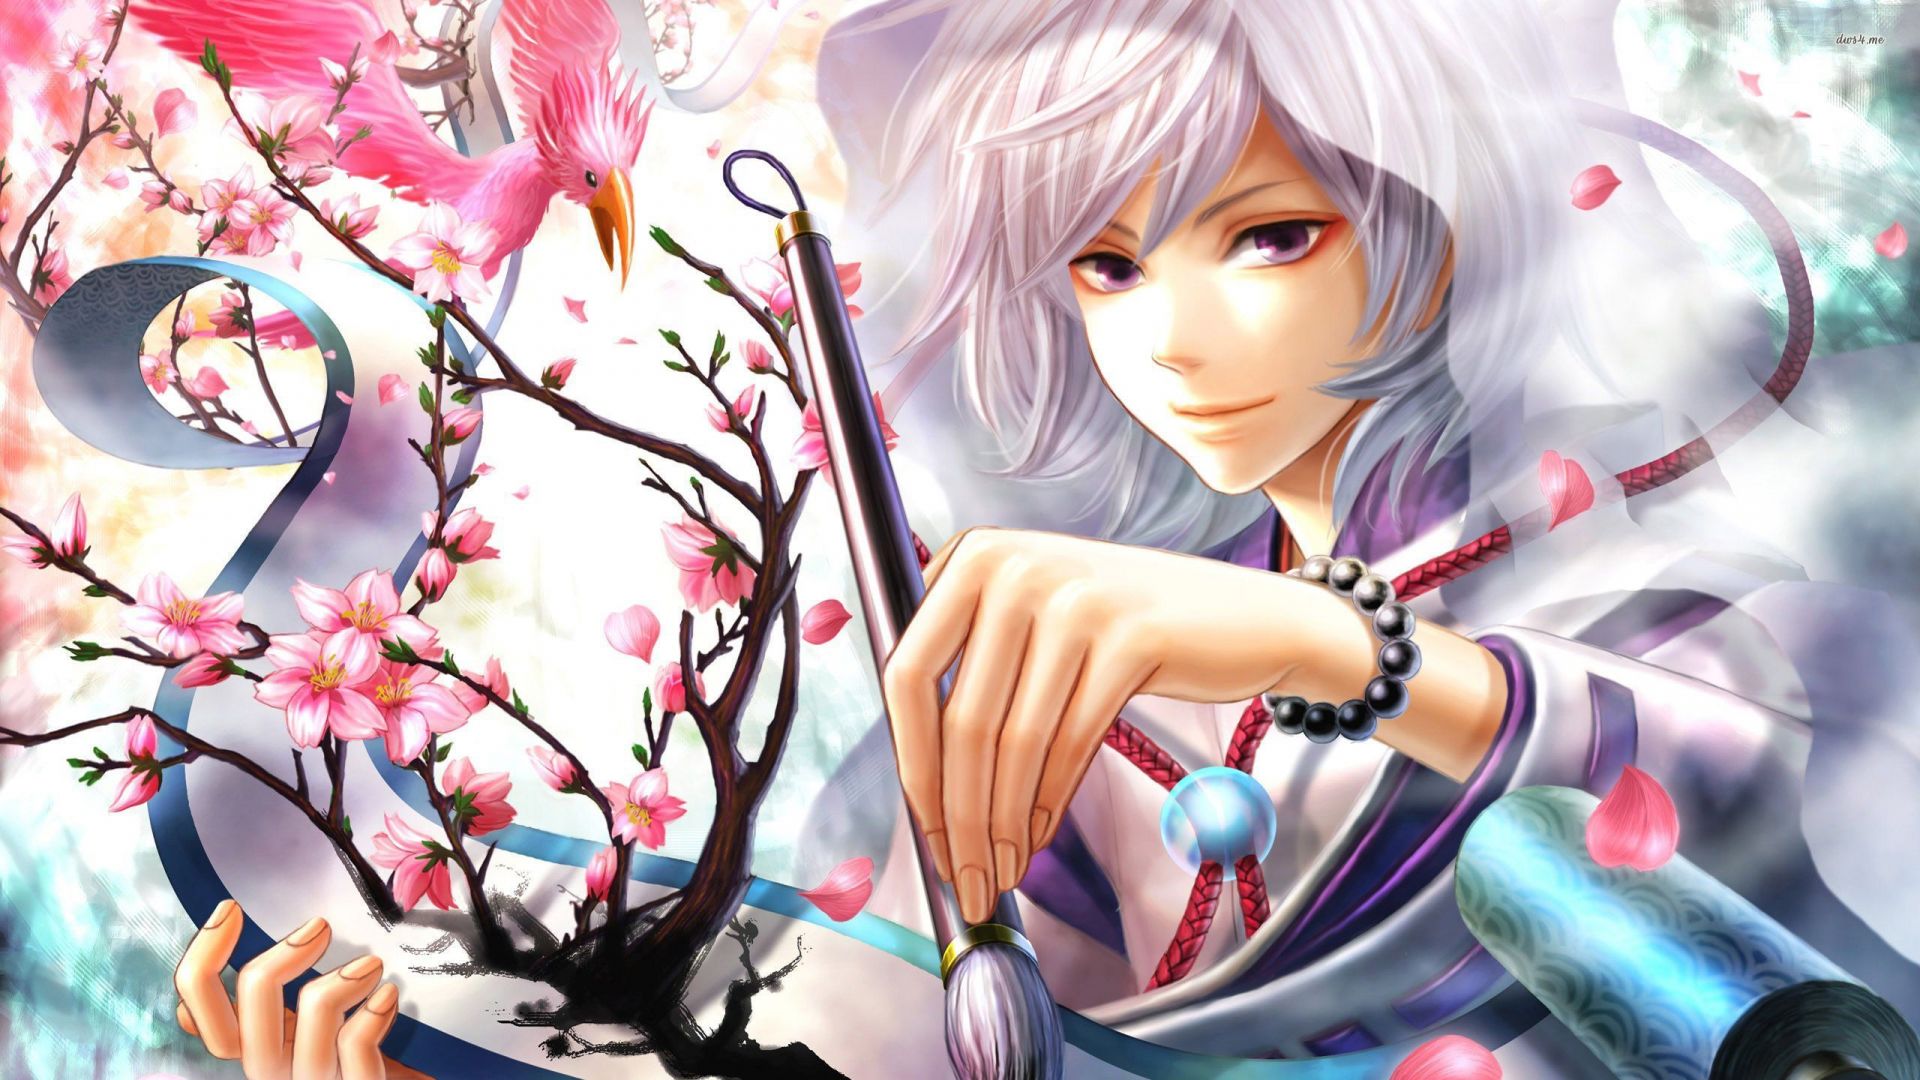 Desktop Wallpaper Cute, White Hair, Anime Girl, Smile, Paint, HD Image, Picture, Background, 4wut84